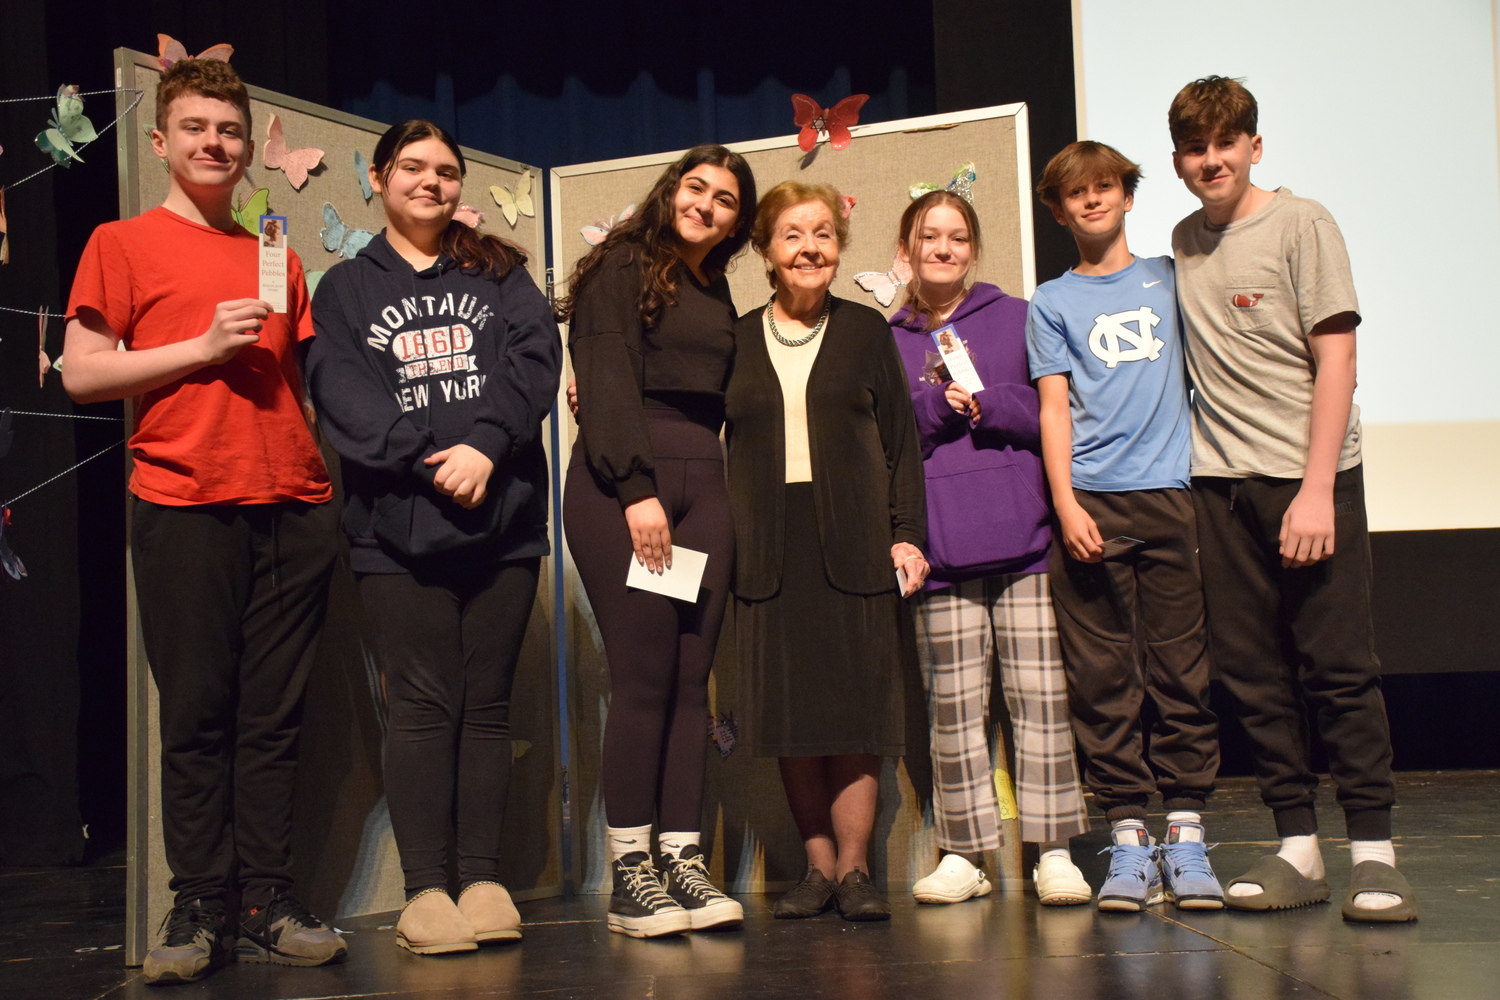 Eastport-South Manor Jr.-Sr. High School eighth grade students had a rare opportunity to attend an assembly with guest speaker, author and Holocaust survivor Marion Blumenthal Lazan. The students are currently reading her book, “Four Perfect Pebbles,” about Mrs. Blumenthal Lazan’s experience in a concentration camp when she was only 9 years old. COURTESY EASTPORT-SOUTH MANOR SCHOOL DISTRICT